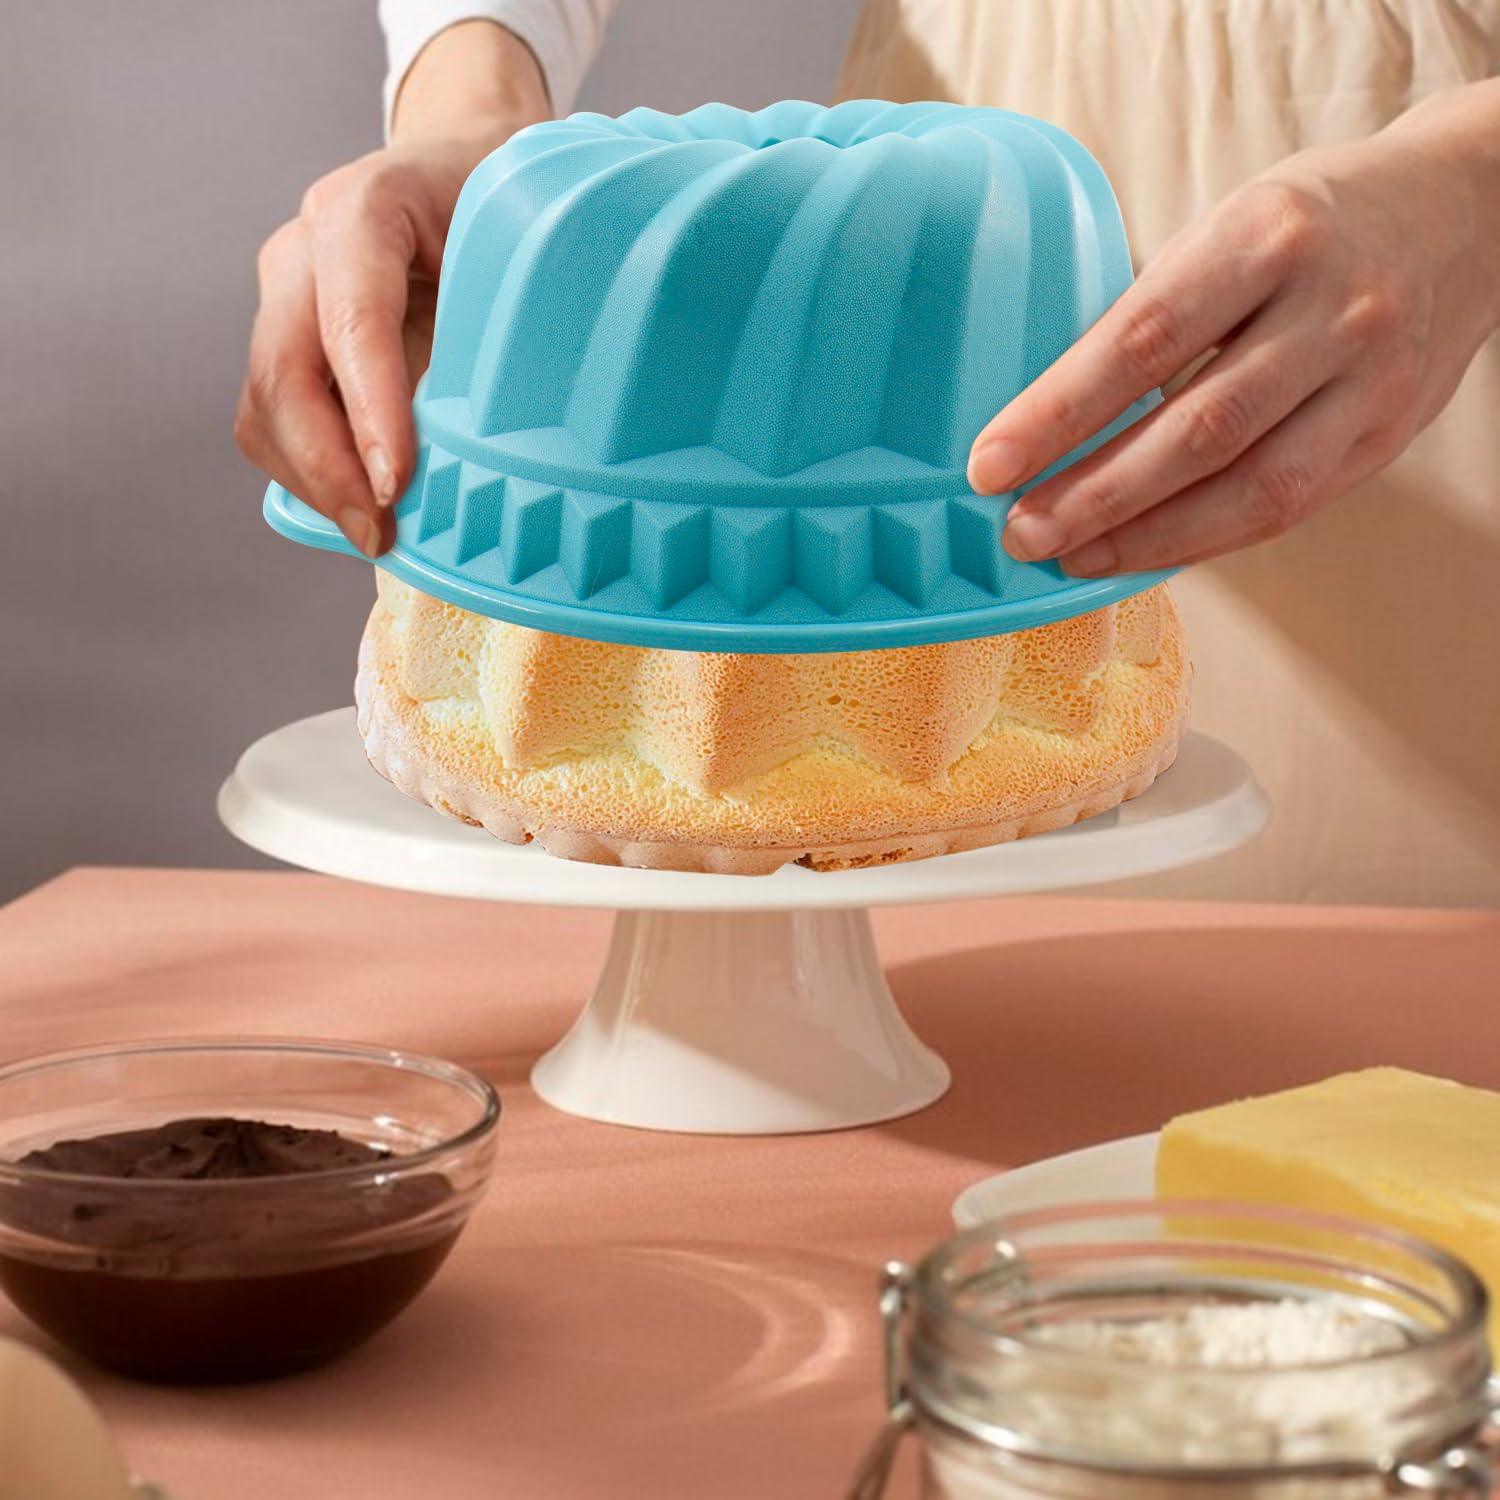 DRAONGYE 9.5 Inch Silicone Fluted Pans, Non-Stick Silicone Bundt Pan with Handle, Home Baking DIY Cake Mold for Cake, Chocolate, Jelly, Bread, Para Gelatinas (Blue, 1 Pack) - CookCave